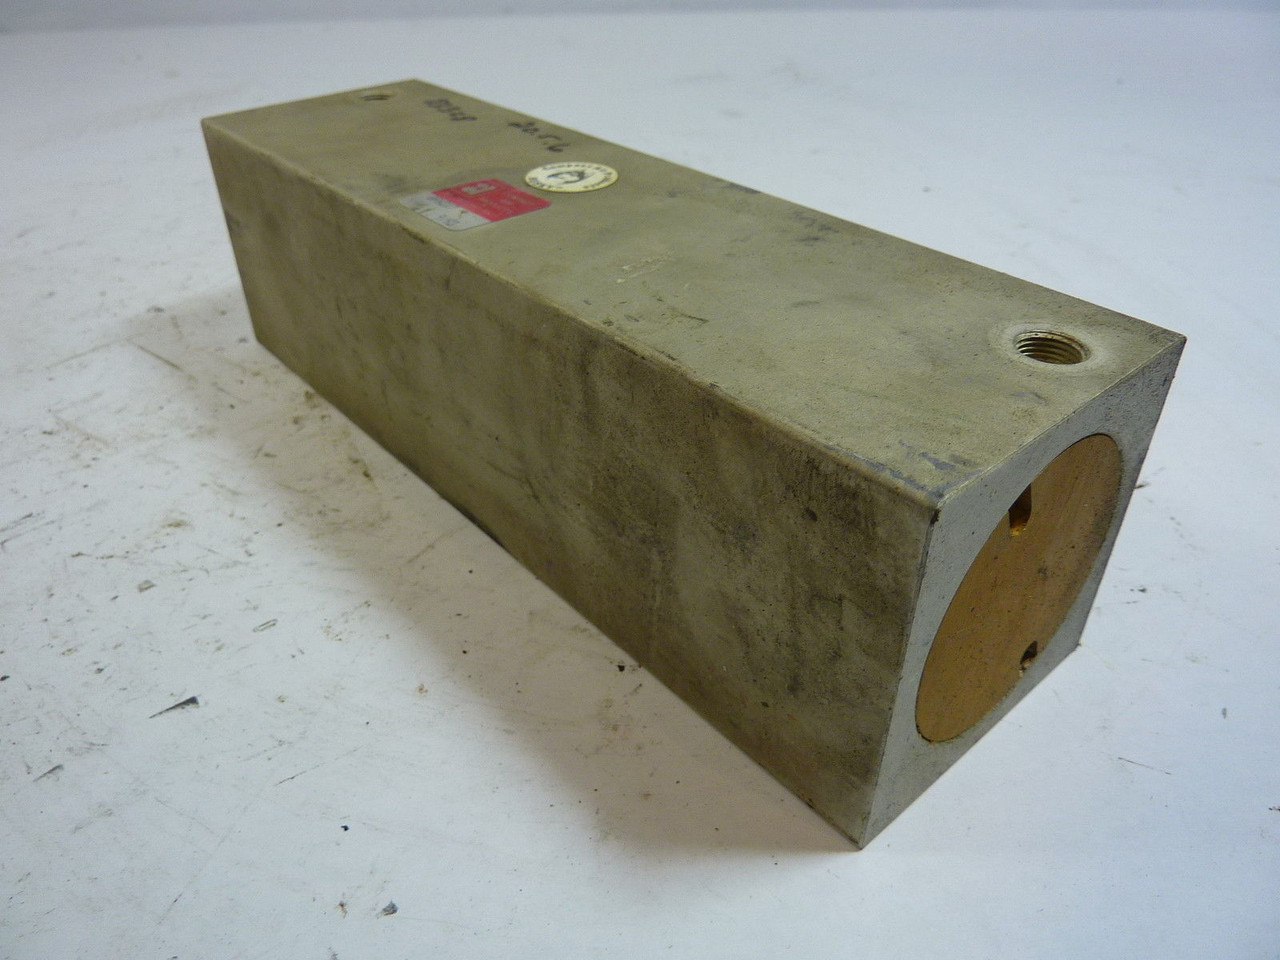 Compact Air BFH2X7 Pneumatic Air Cylinder USED